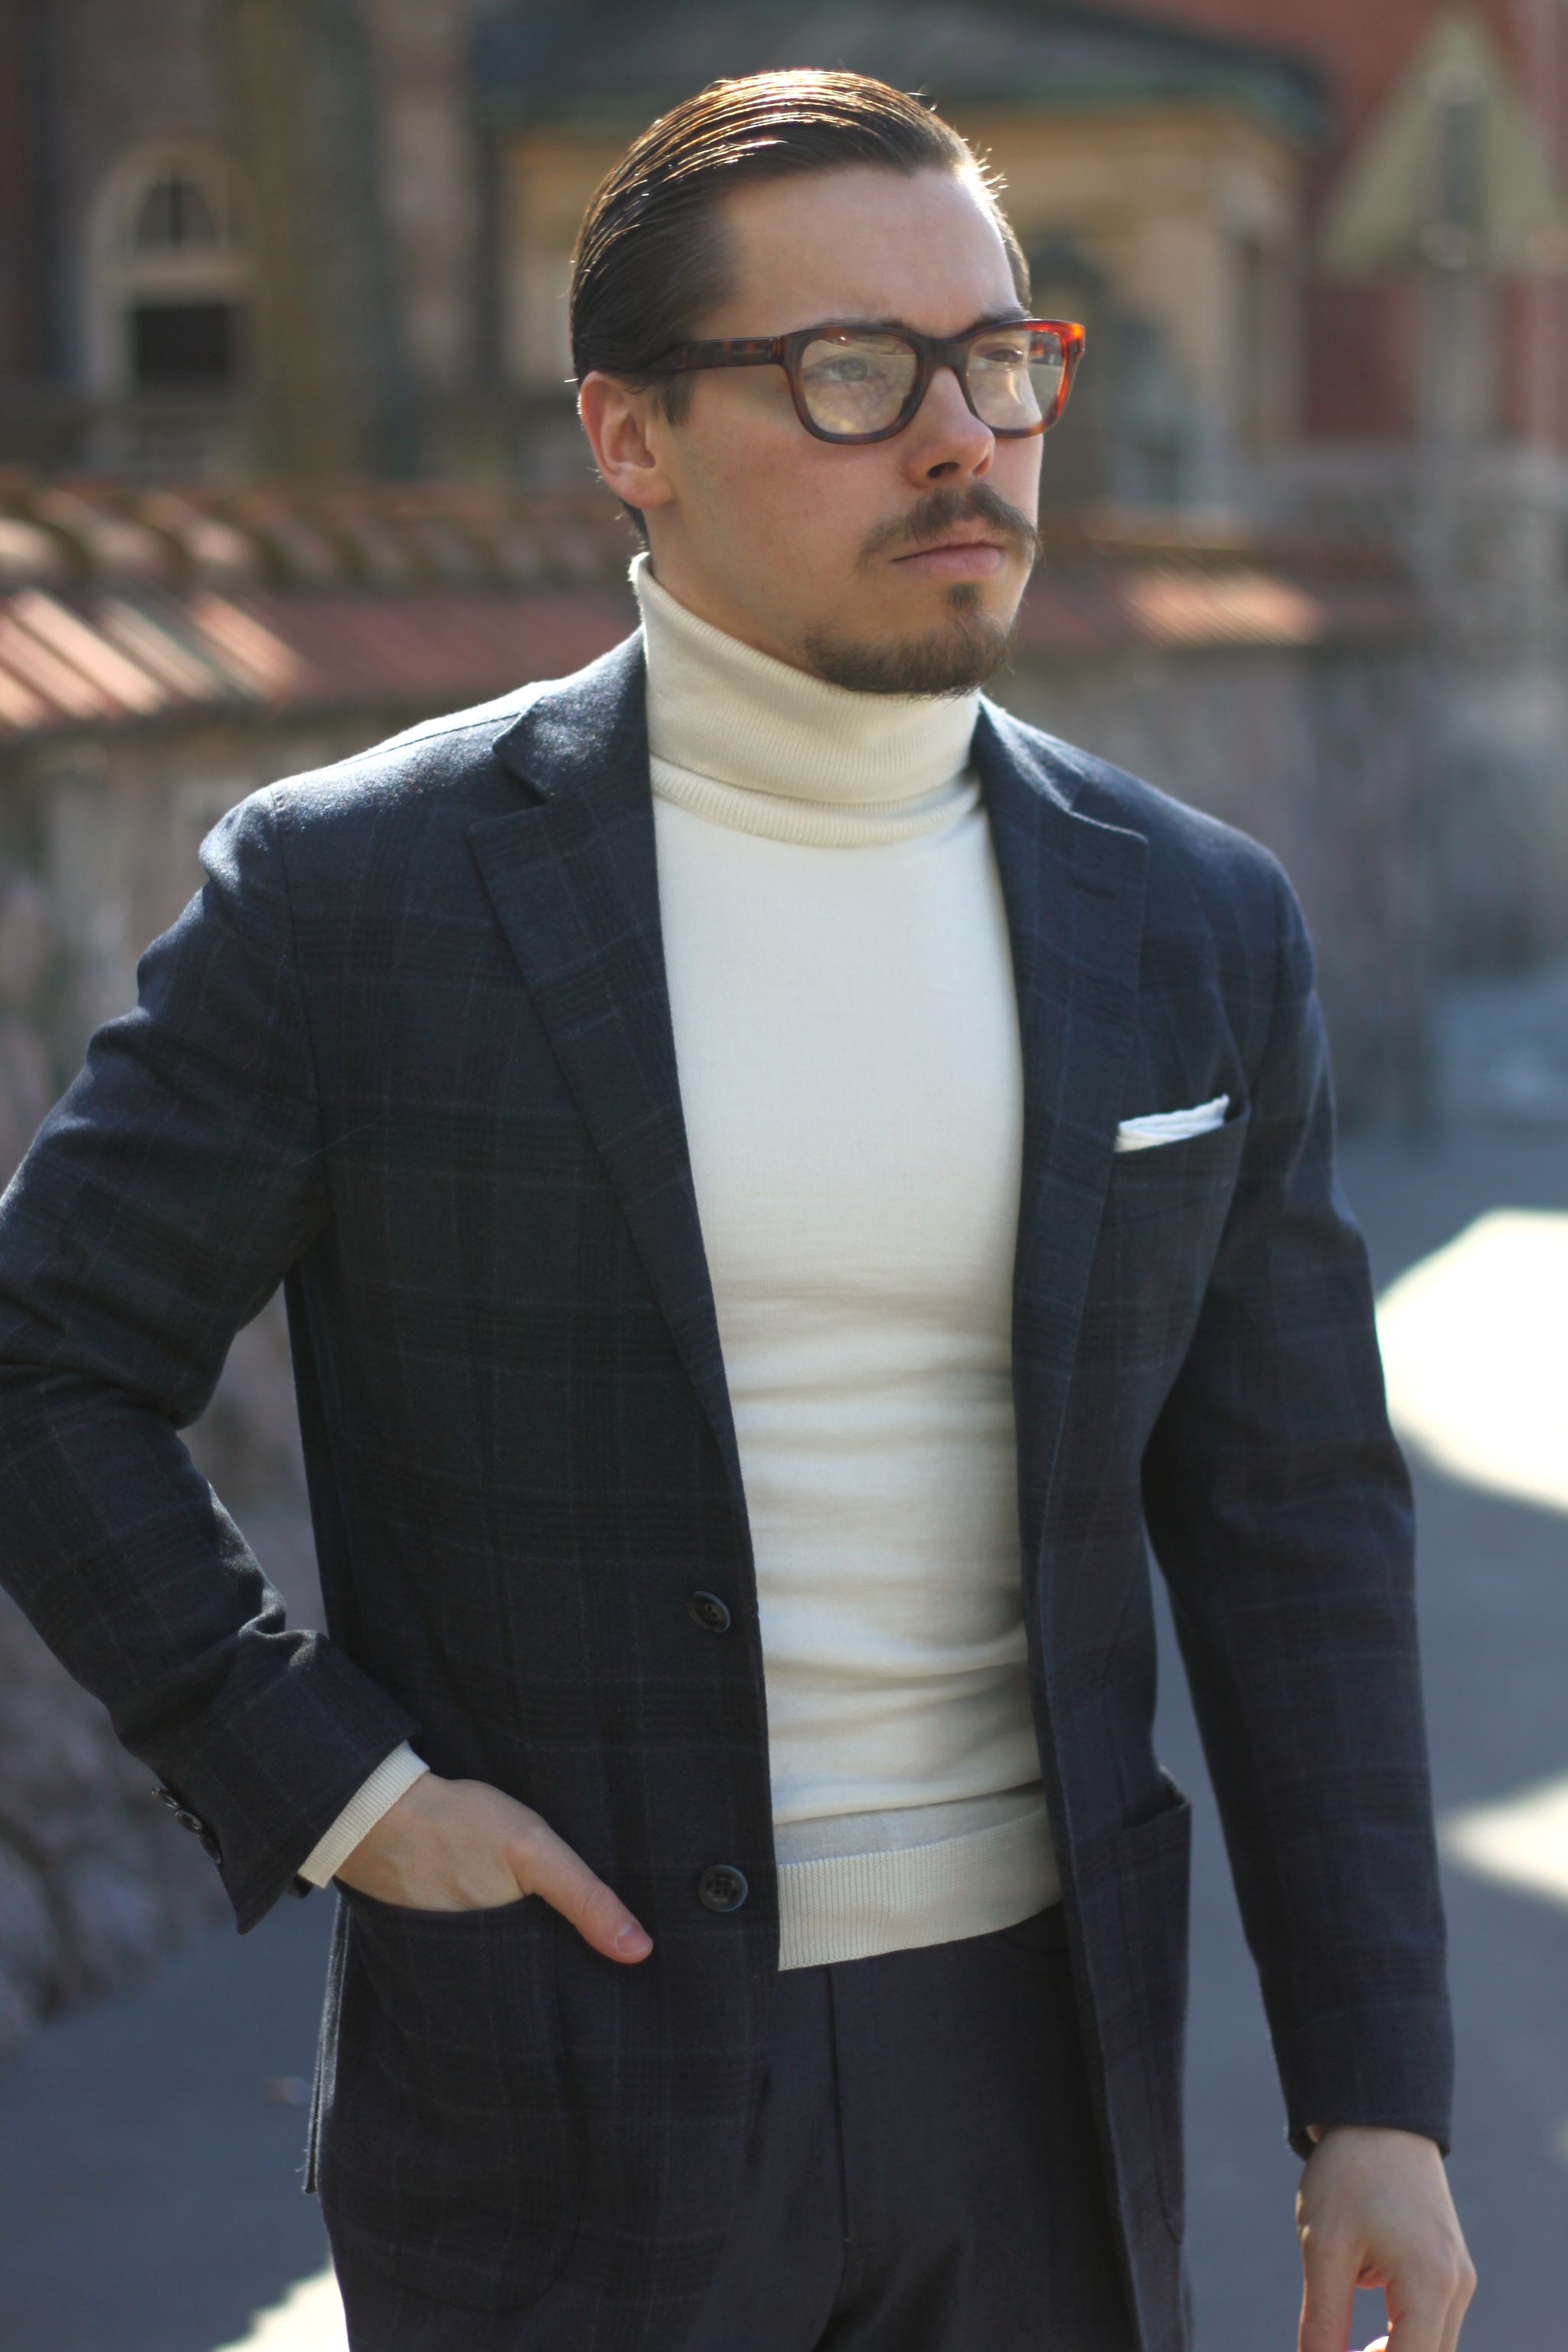 Always there is no need for puffy or striking pocket square. Actually with this outfit one could have left the square totally out, even though white tv-fold is always a safe bet.